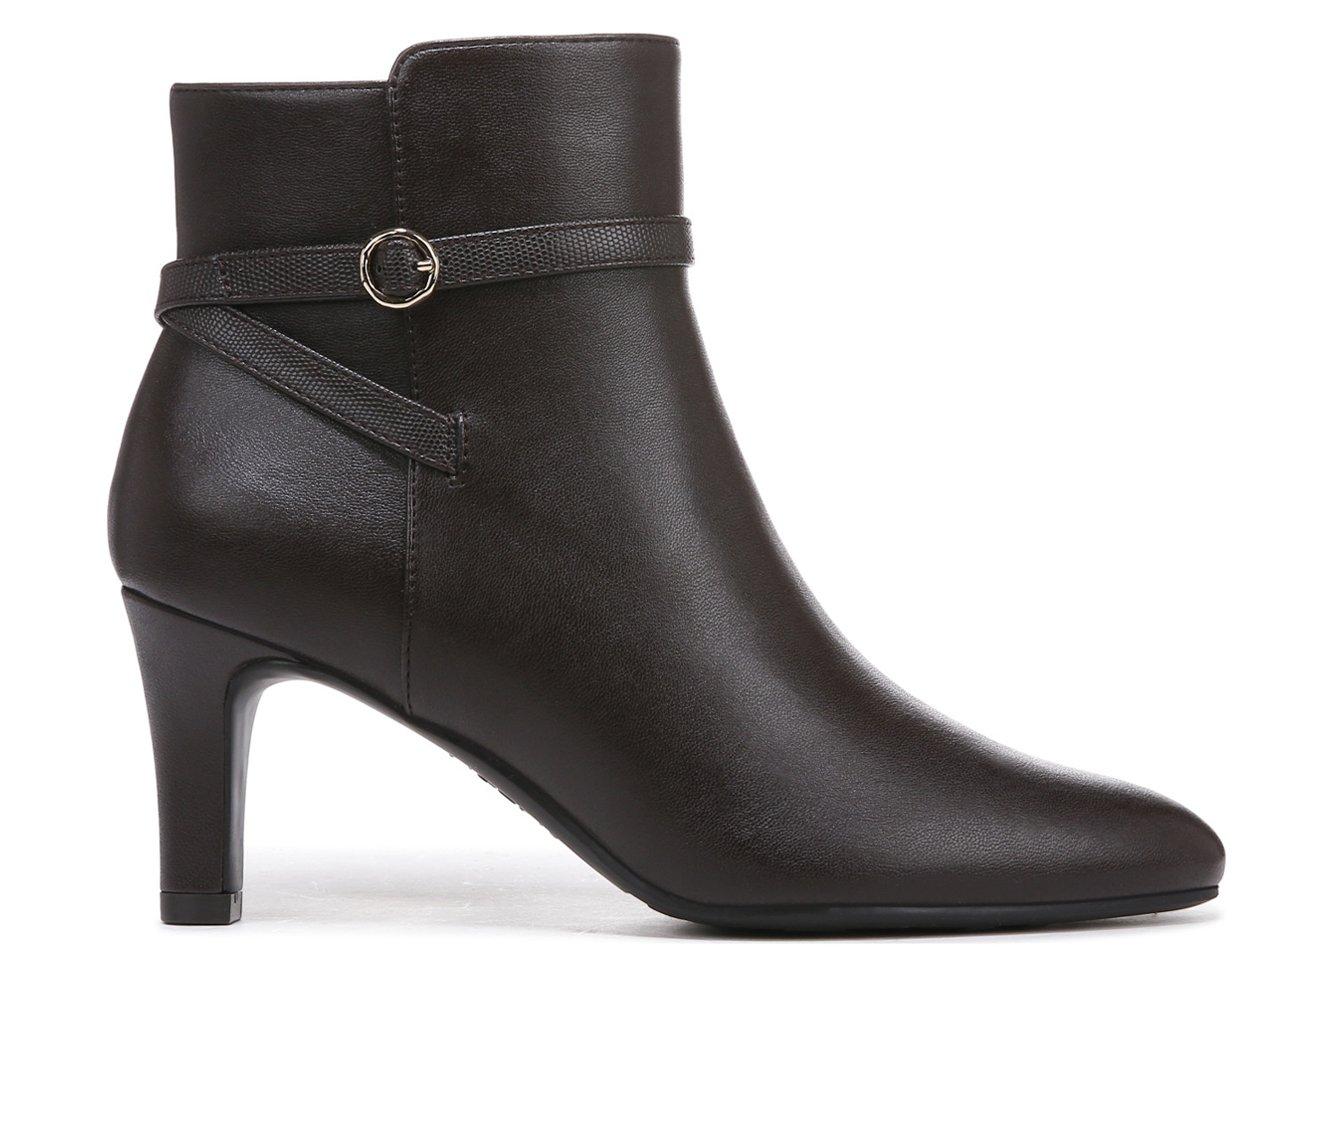 Women's LifeStride Guild Heeled Ankle Booties